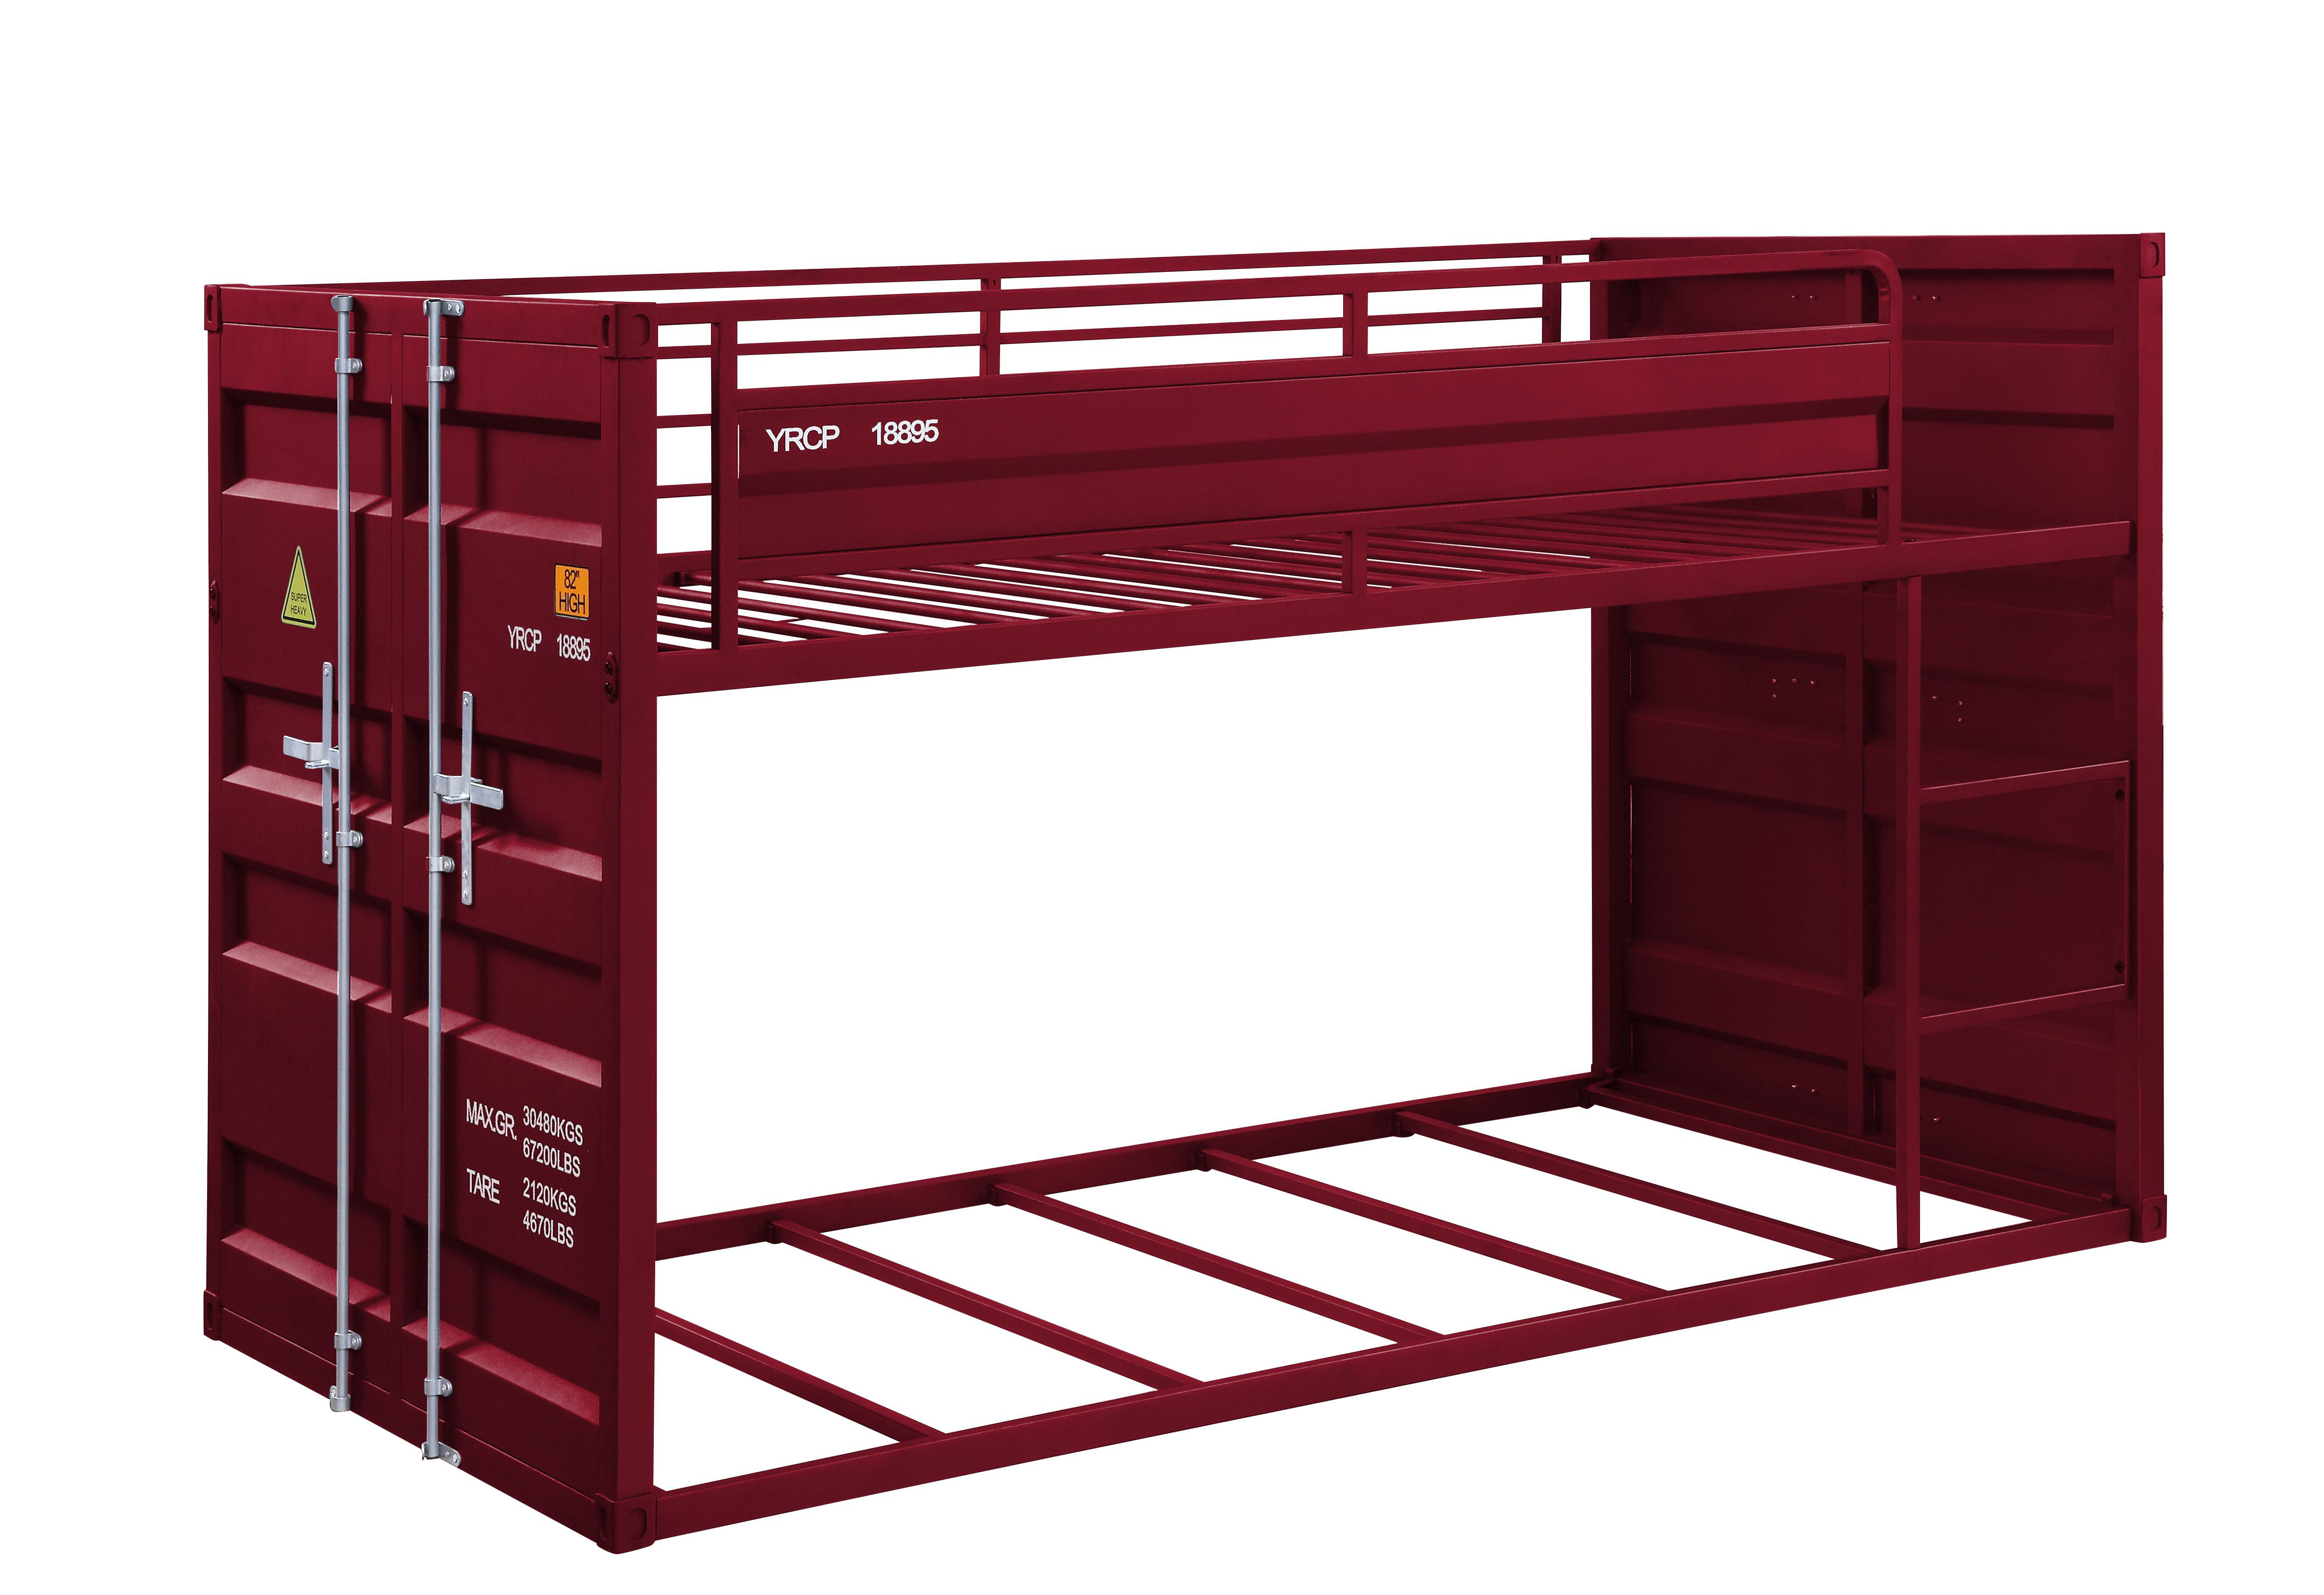 Cargo Twin Bunk Bed In Red Finish, Cargo Bunk Beds With Trundle